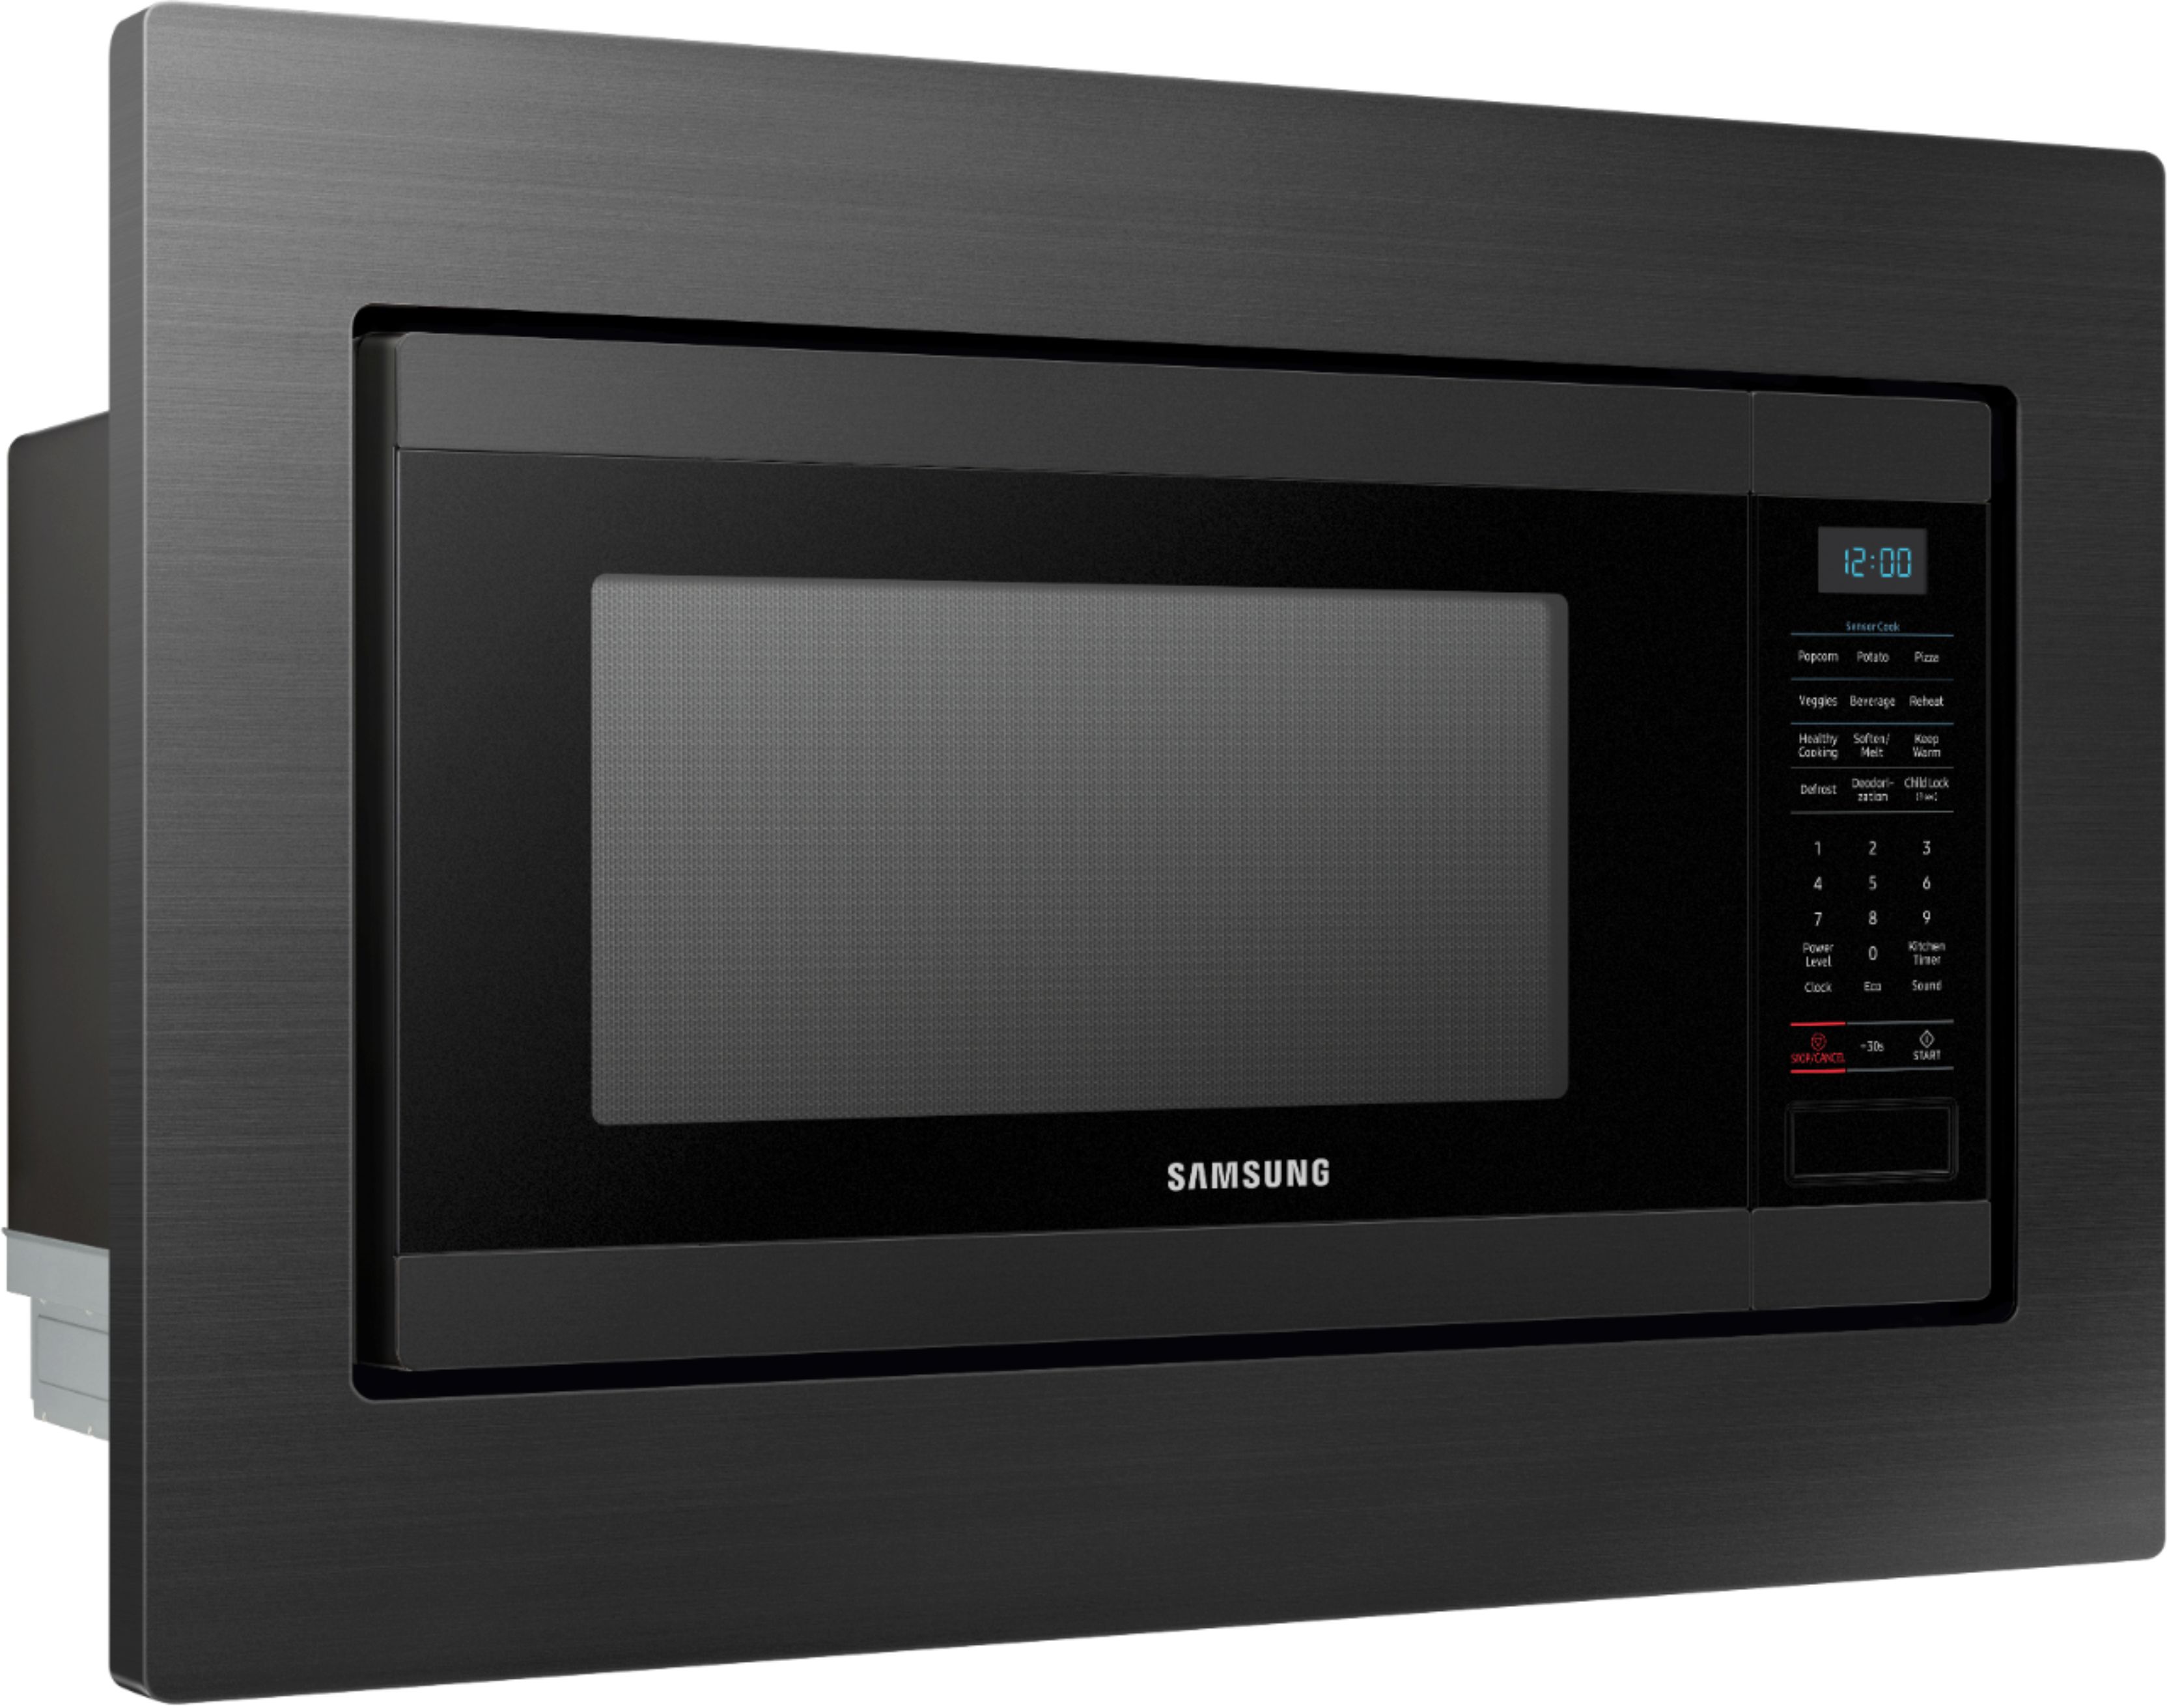 Left View: Samsung - 30" Trim Kit for MS19M8020TG Microwave - Black Stainless Steel